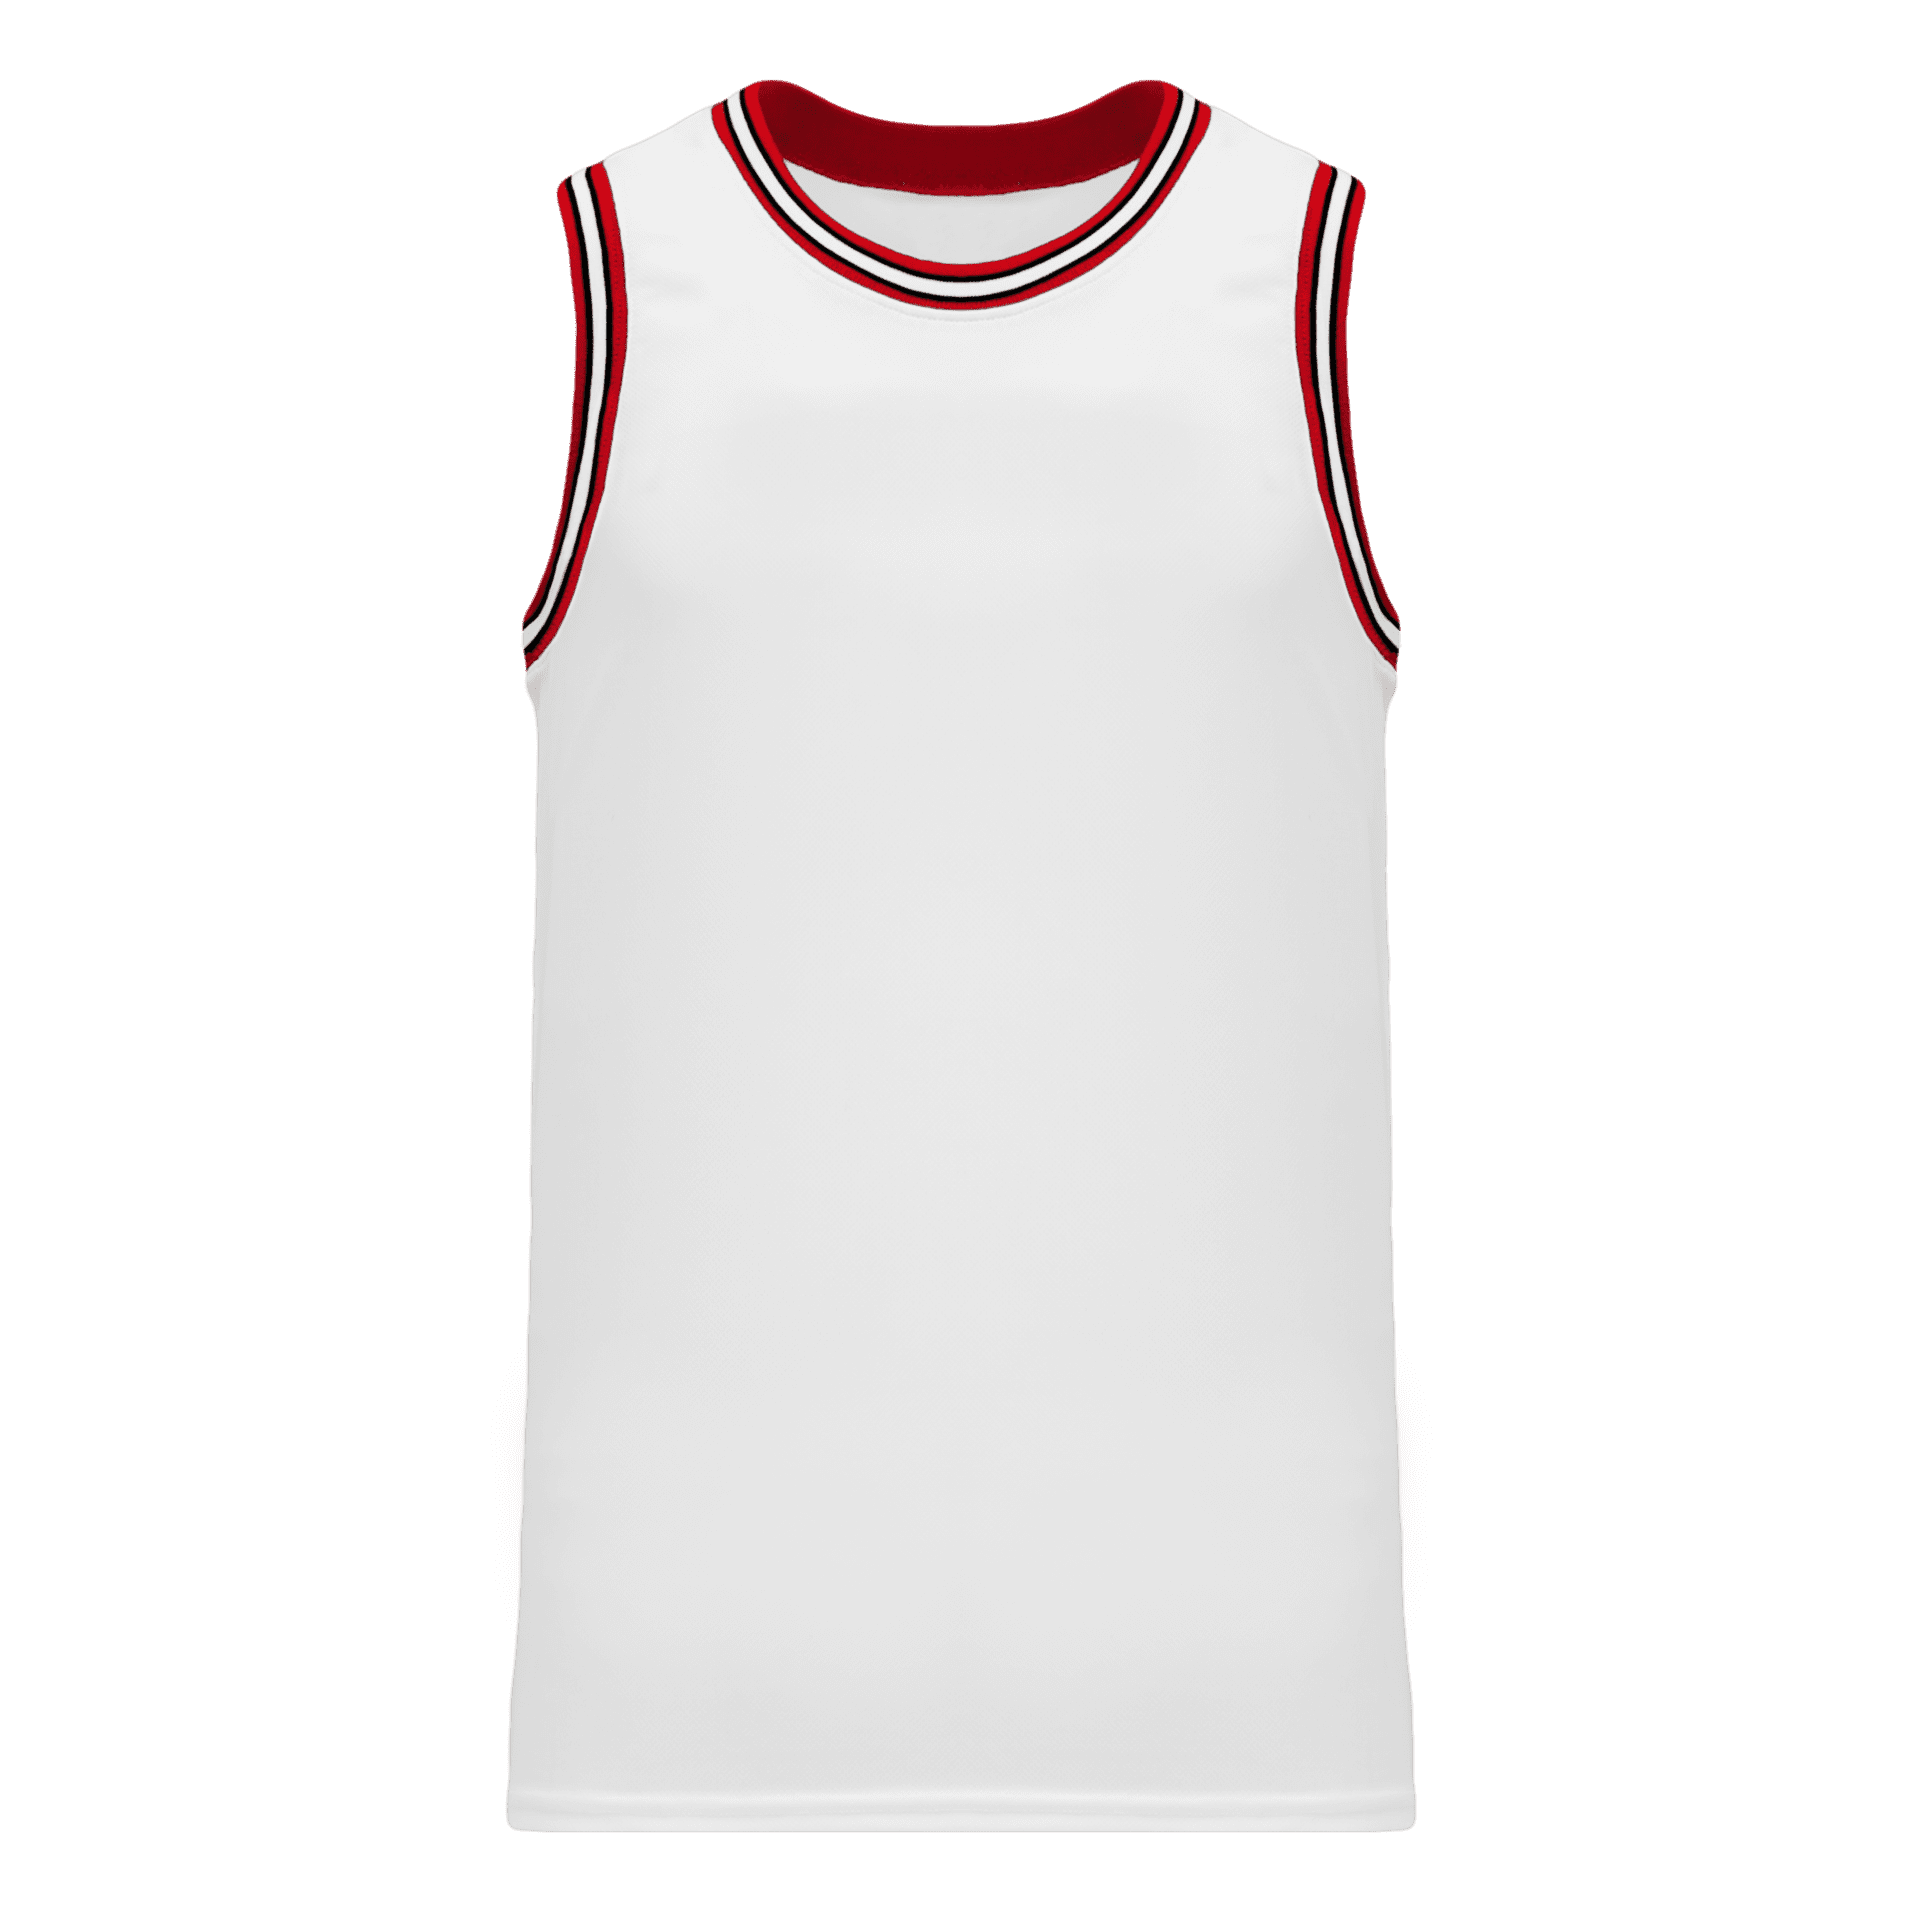 ATHLETIC KNIT PRO BASKETBALL JERSEY #B1710 White / Red / Black